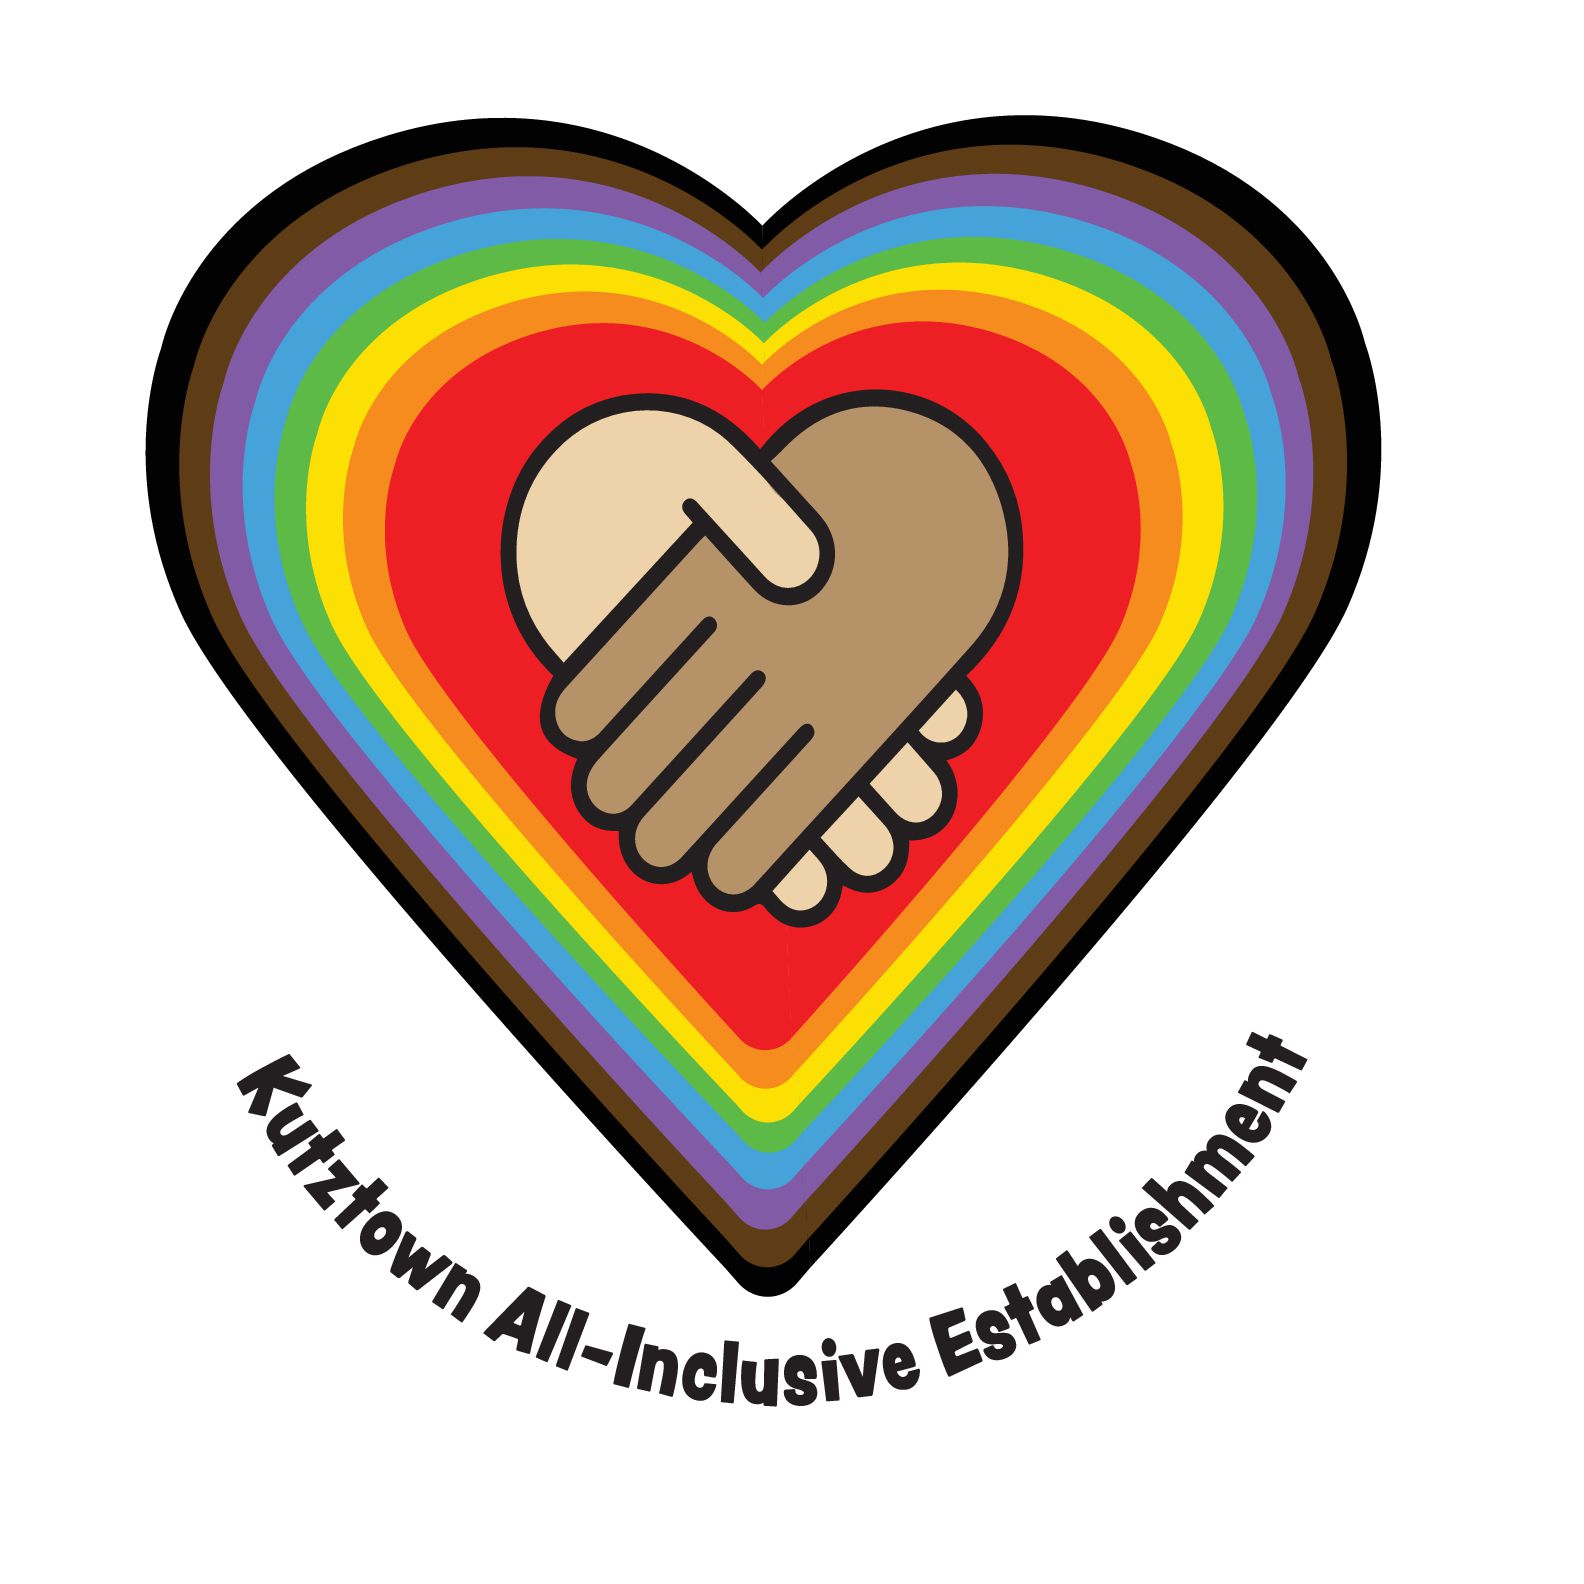 Kutztown all-inclusive establishments logo, two hands shaking inside multi-colored heart shapes.